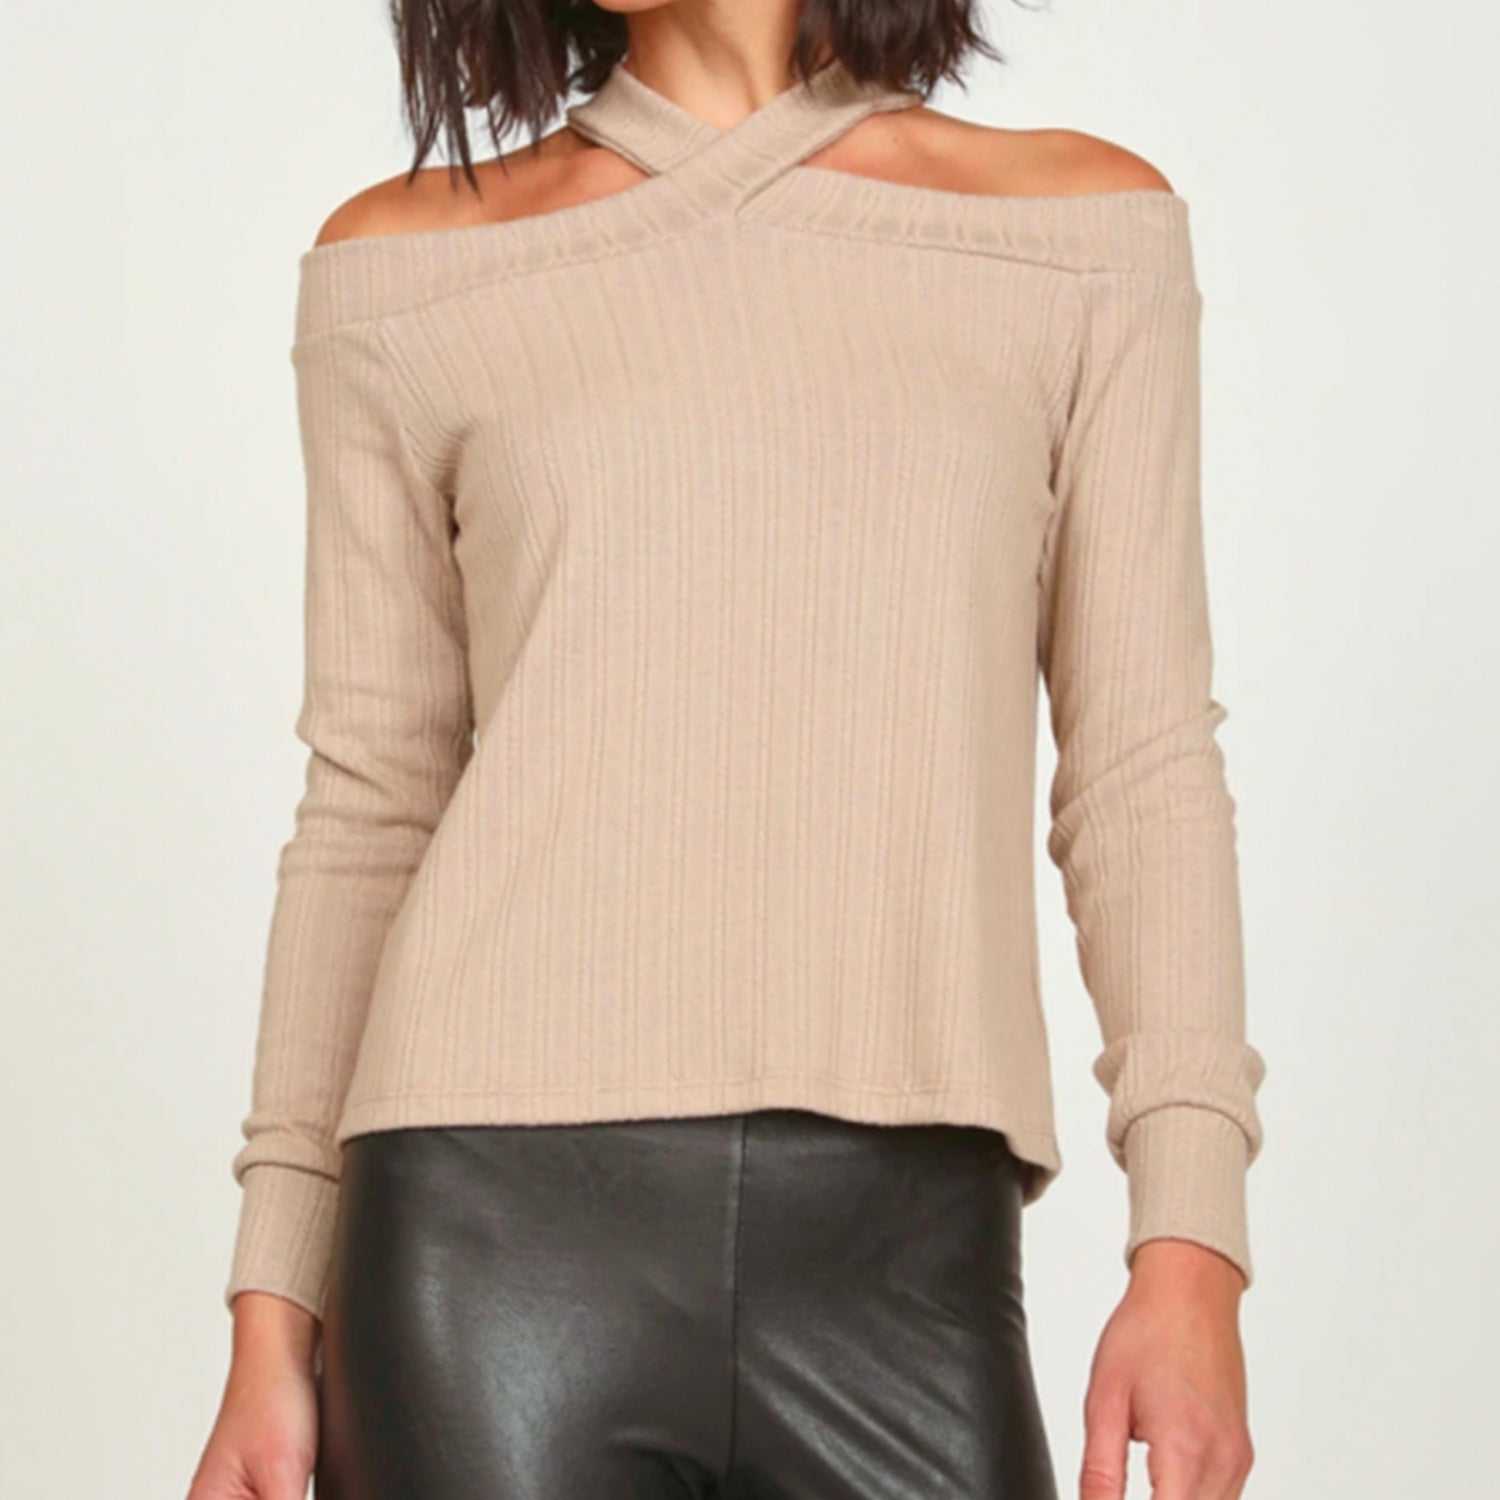 Vintage Havana Cold Shoulder Top. The halter neckline on this top is so flattering for the shoulders. It features a criss cross detail with open shoulders that give off such a feminine look. Pair this top with faux leather leggings and nude booties to add a little pop for a going out look